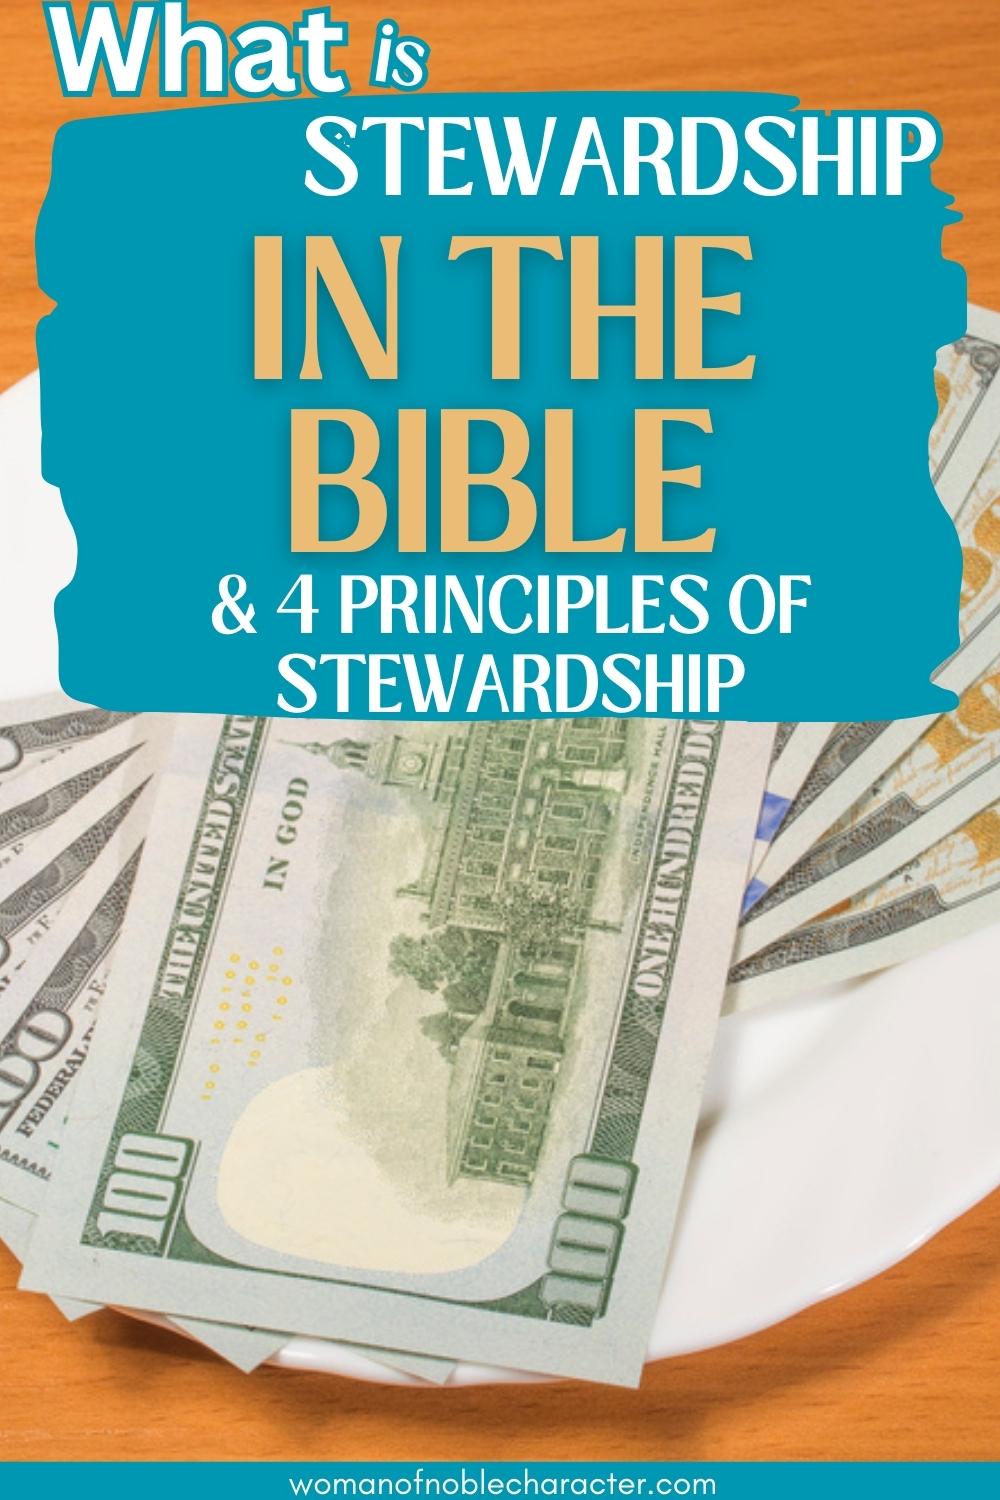 money on a dinner plate with the text what is stewardship in the Bible and 4 principles of stewardship